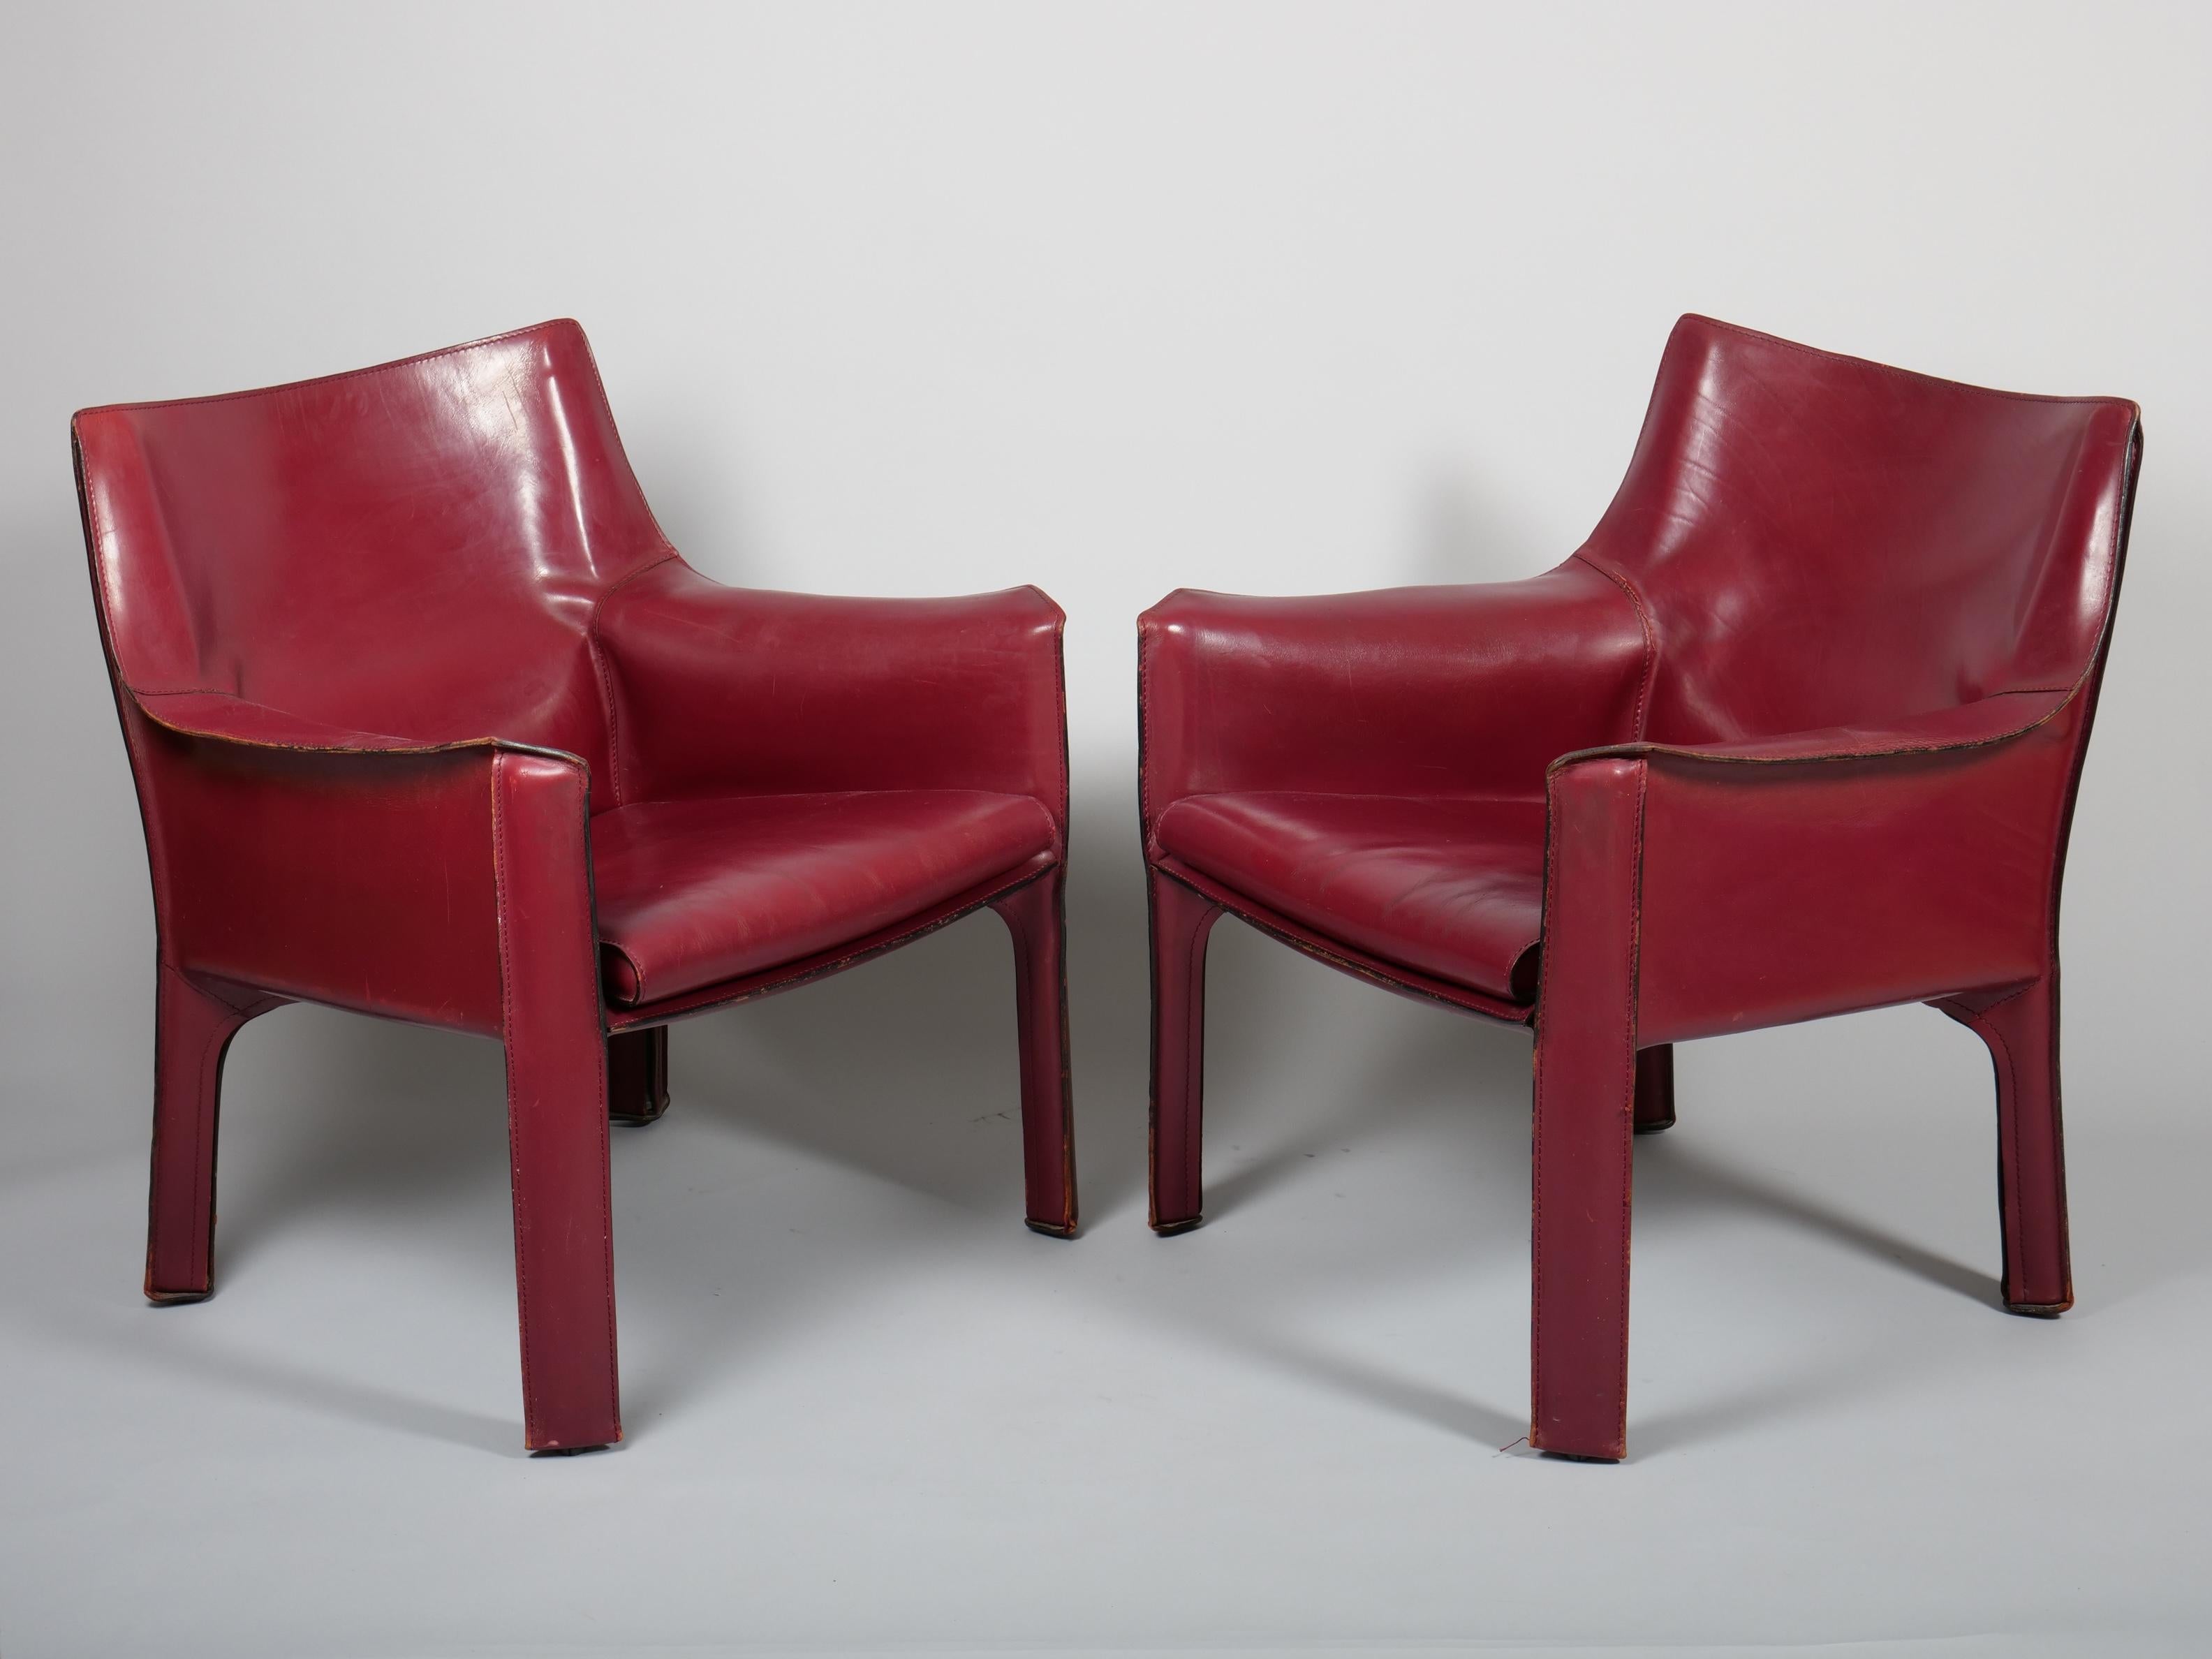 A pair of Mario Bellini armchairs. Model 414. For Cassina

These are the medium sized of the armchair variant. 

The chairs are a thick stitched leather which is made to zip over the steel frame.

The seat is cushioned for a very comfortable seat!

